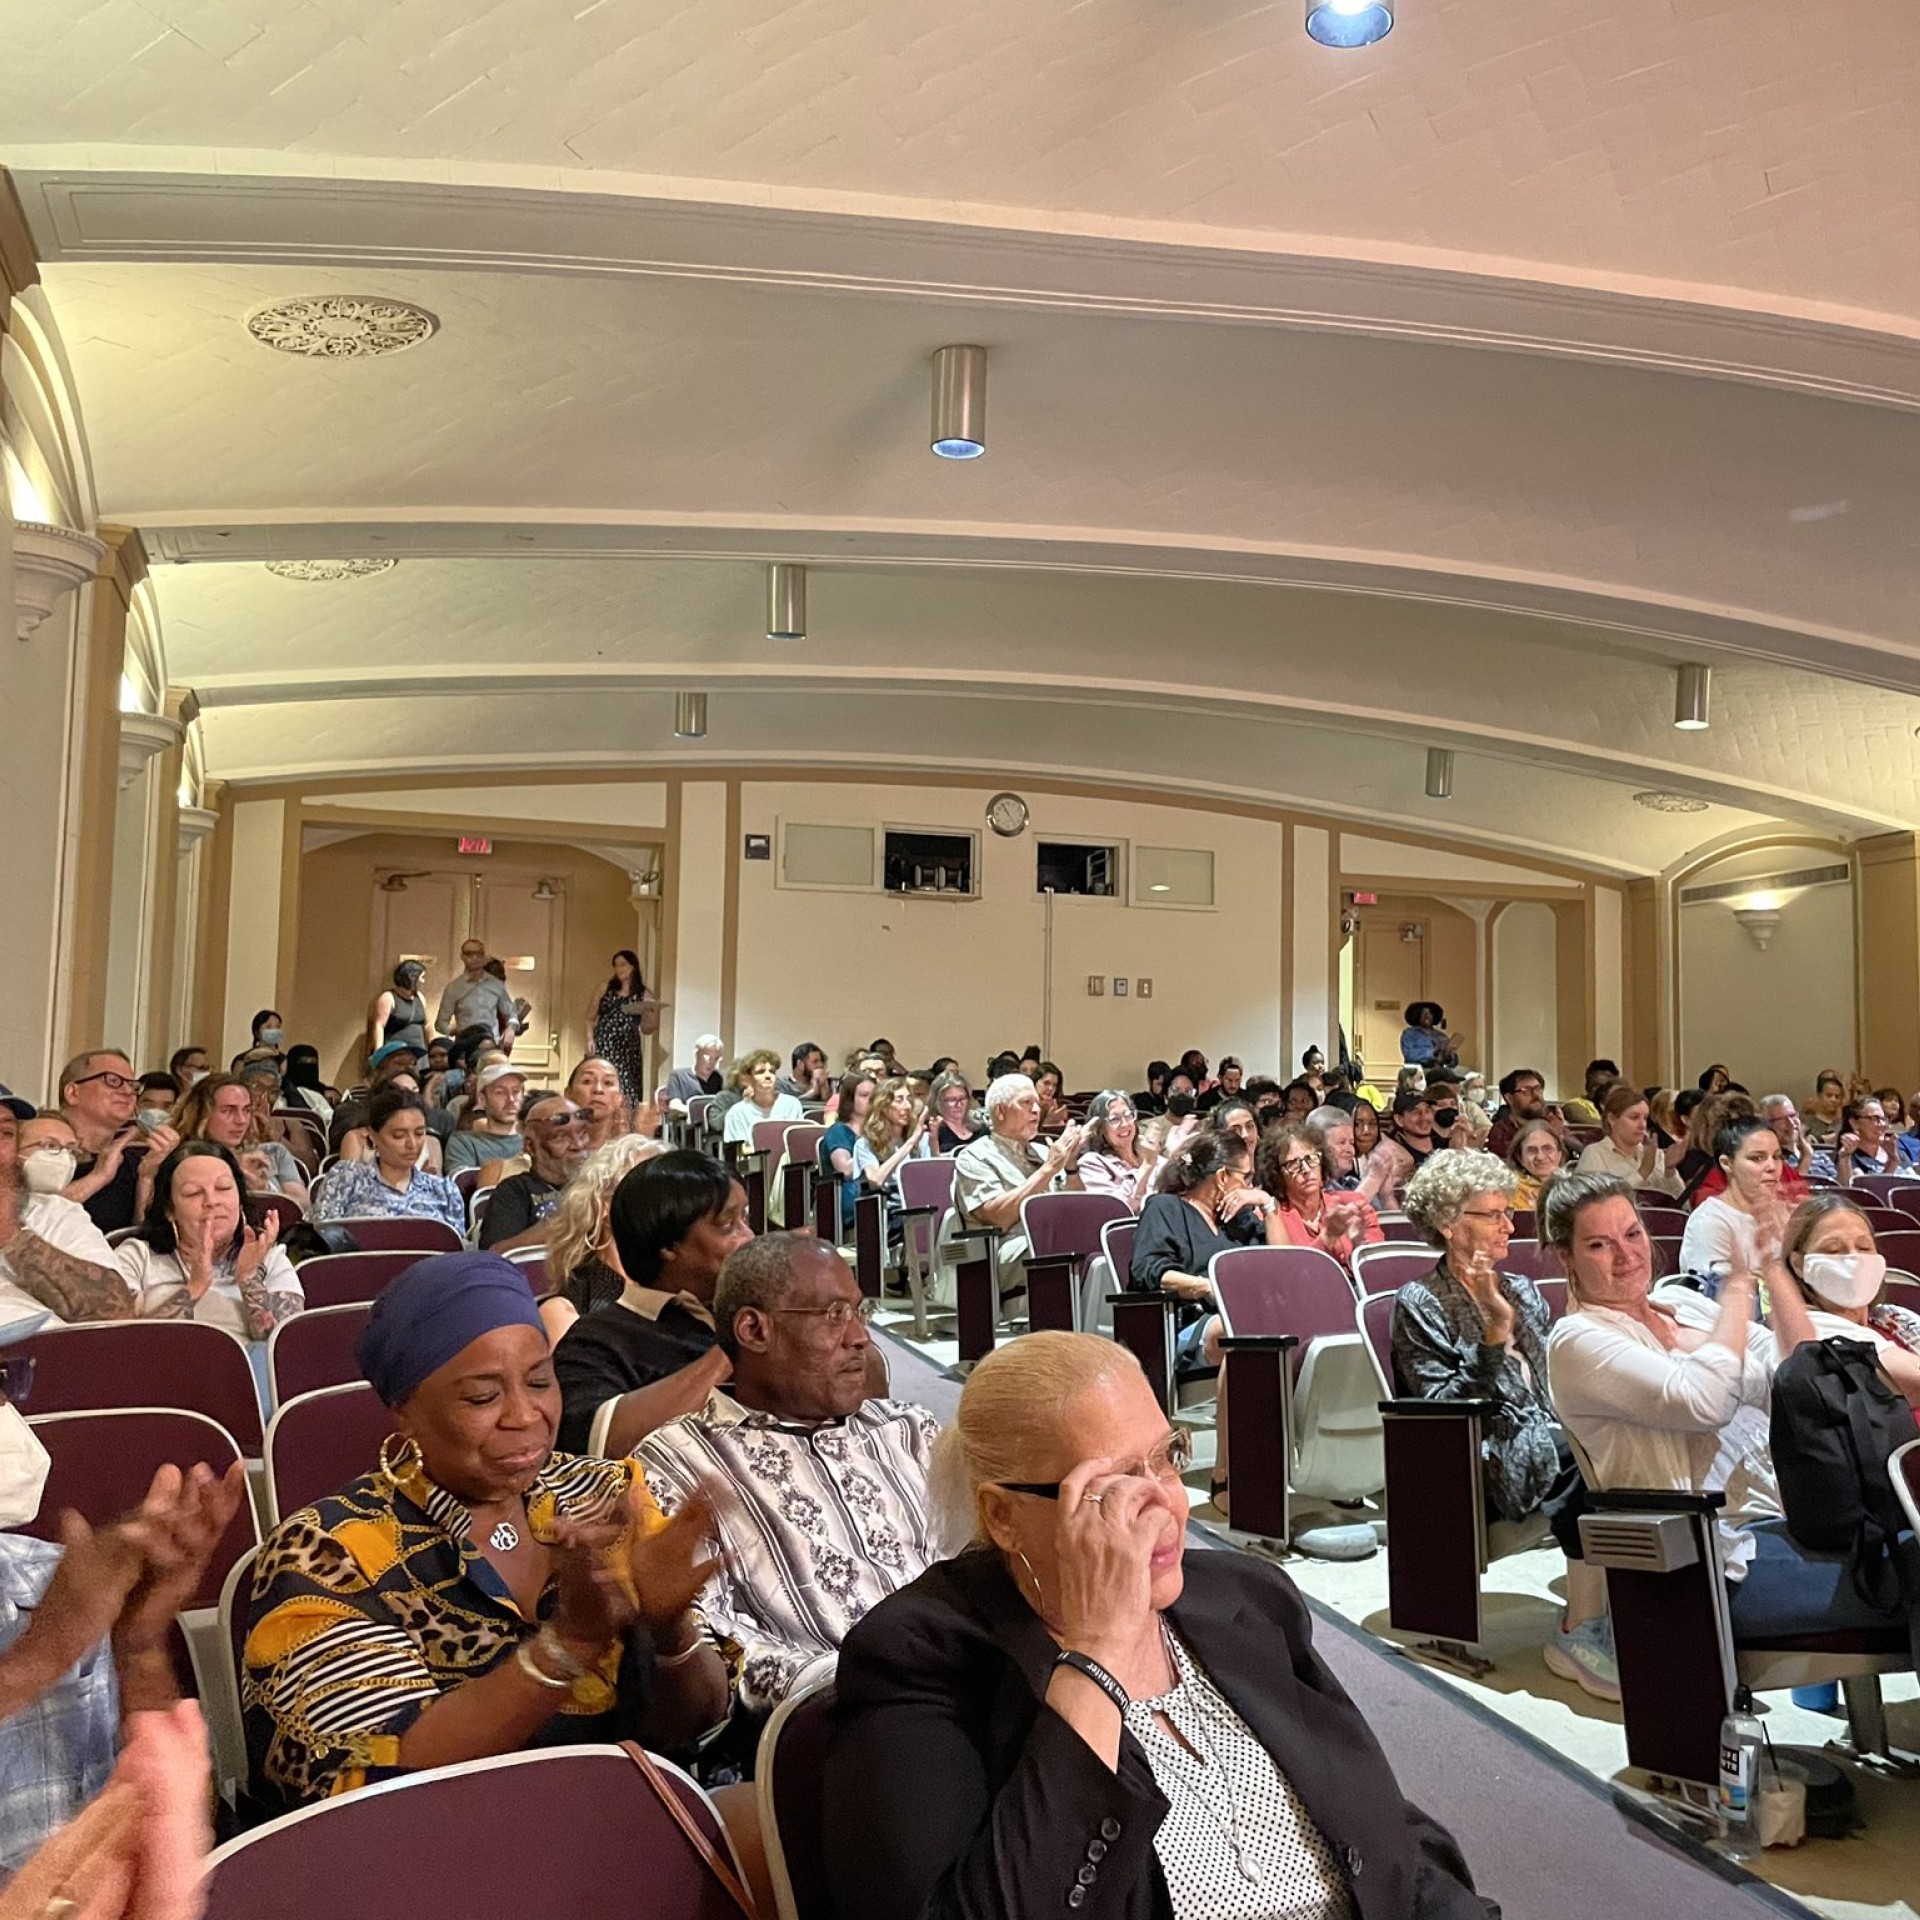 a photo shows a packed auditorium at the Philadelphia free library 